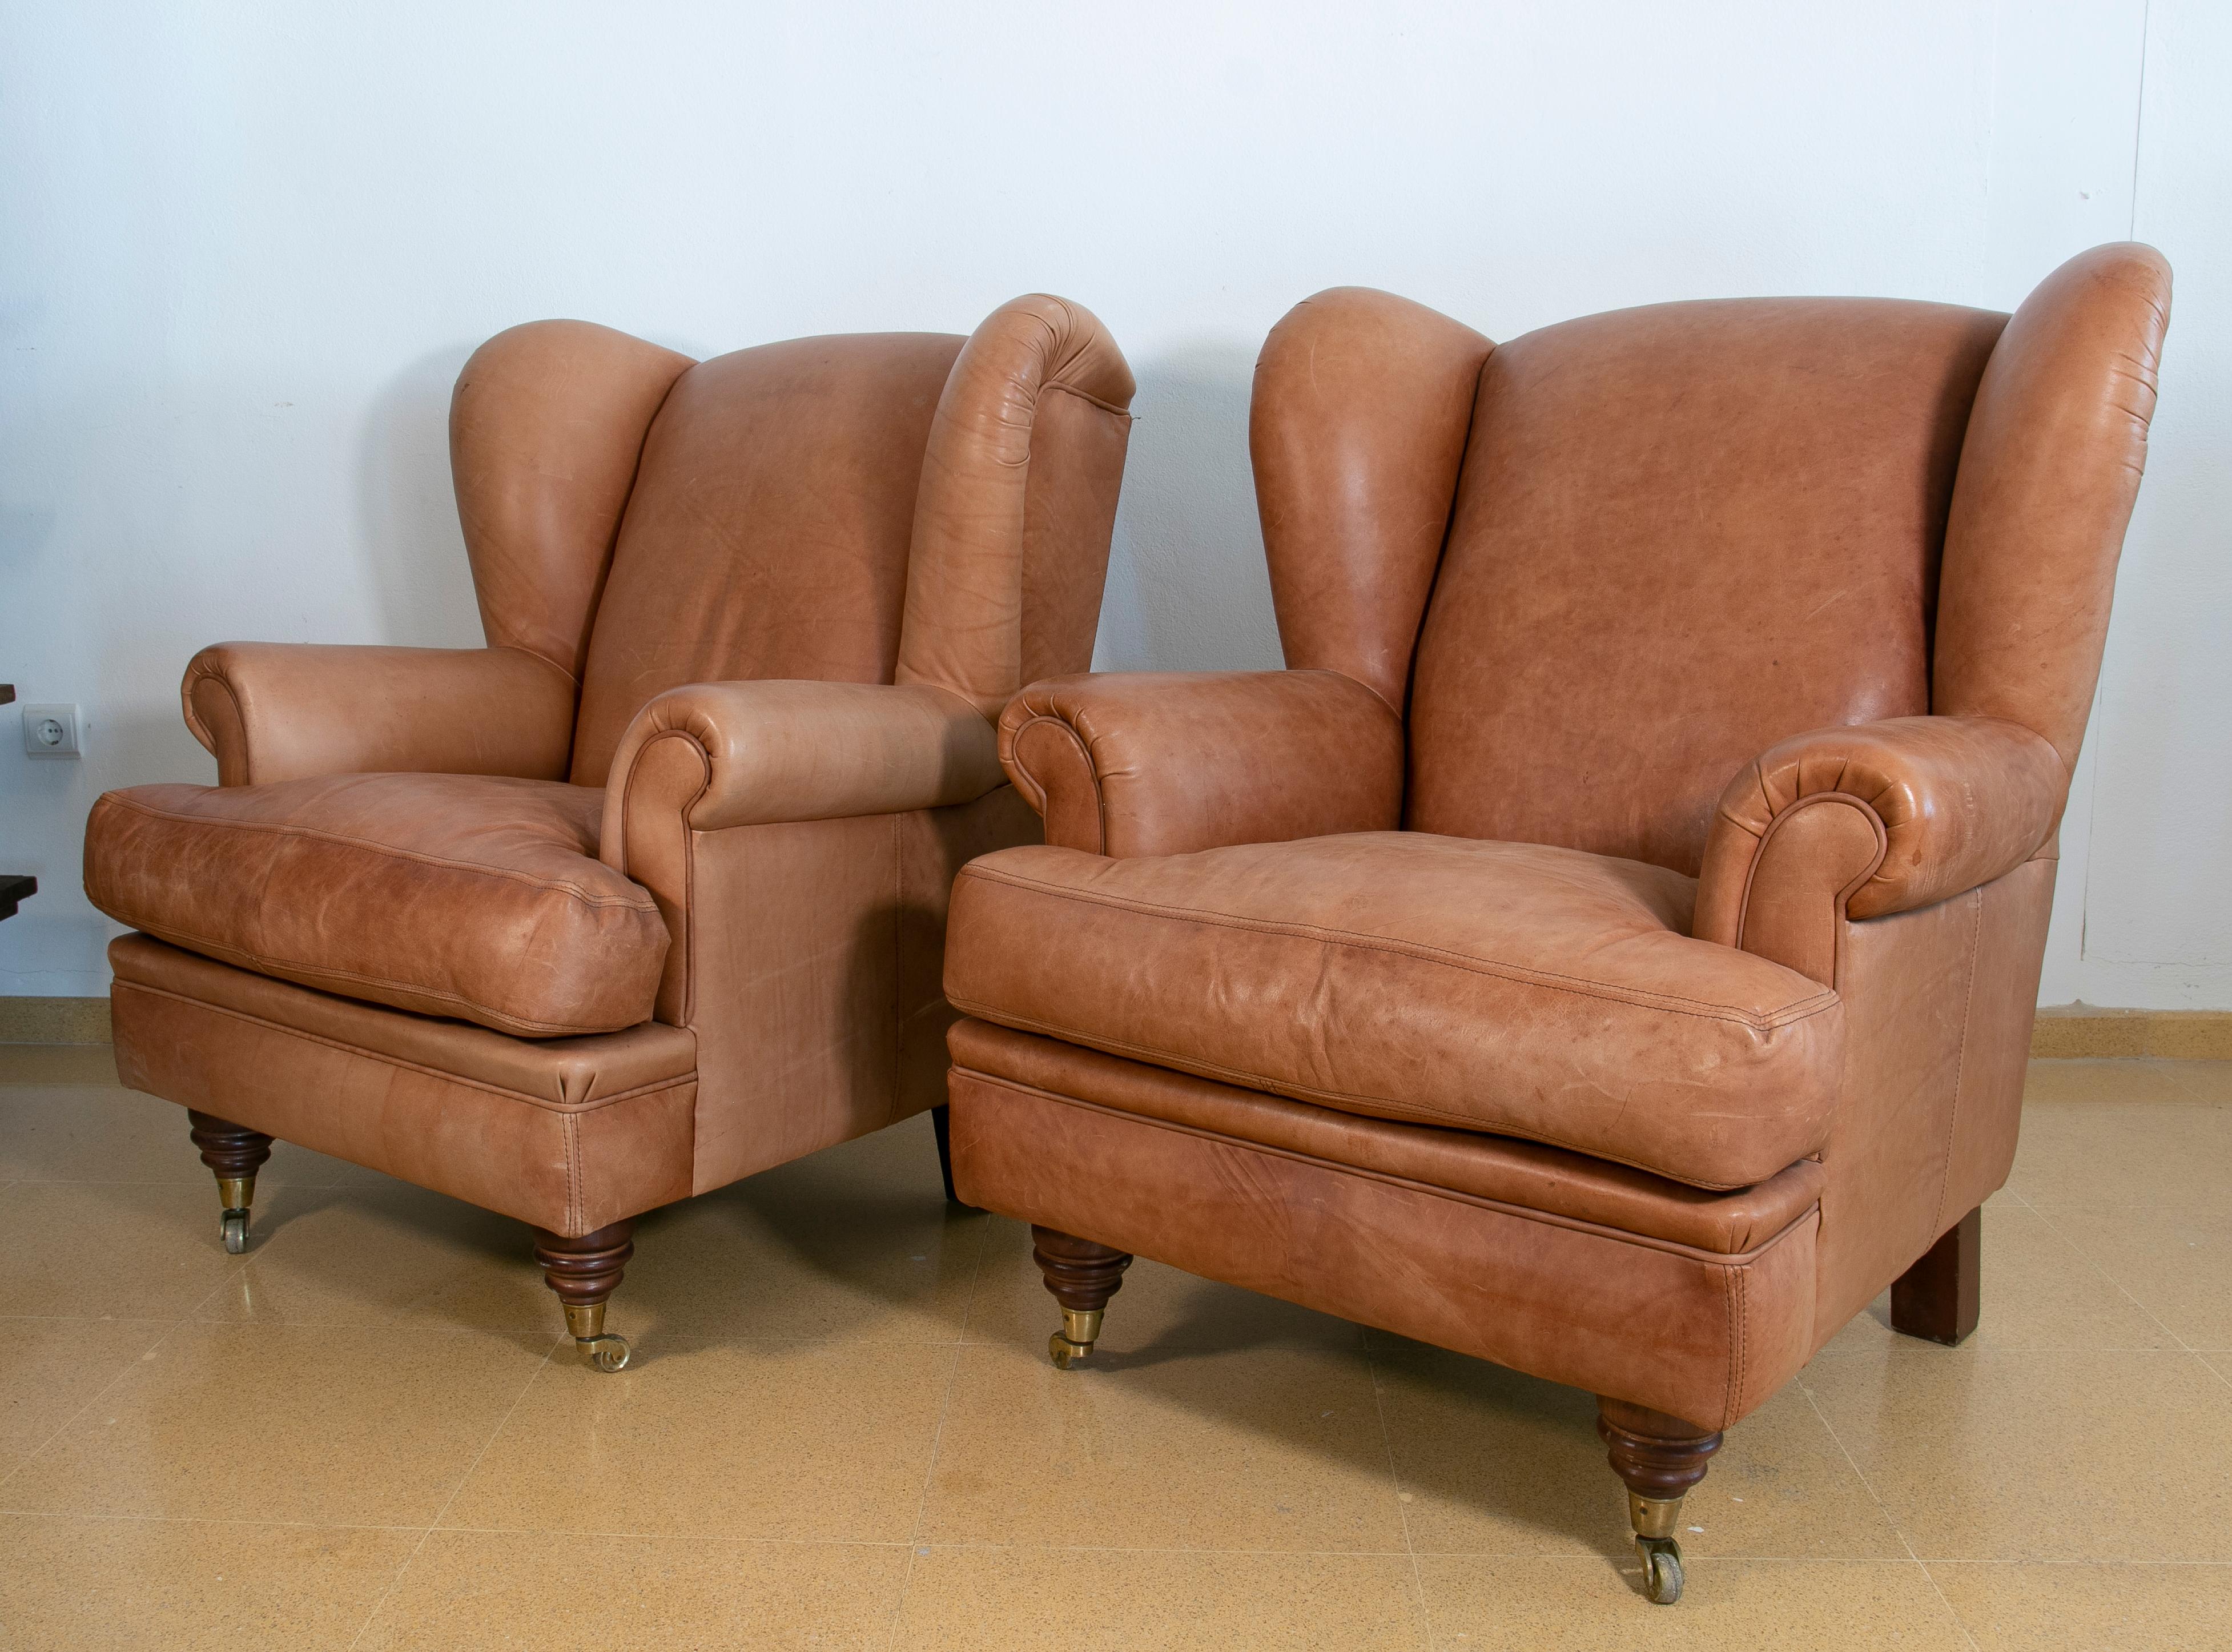 Pair of brown leather armchairs with wooden legs and brass wheels.